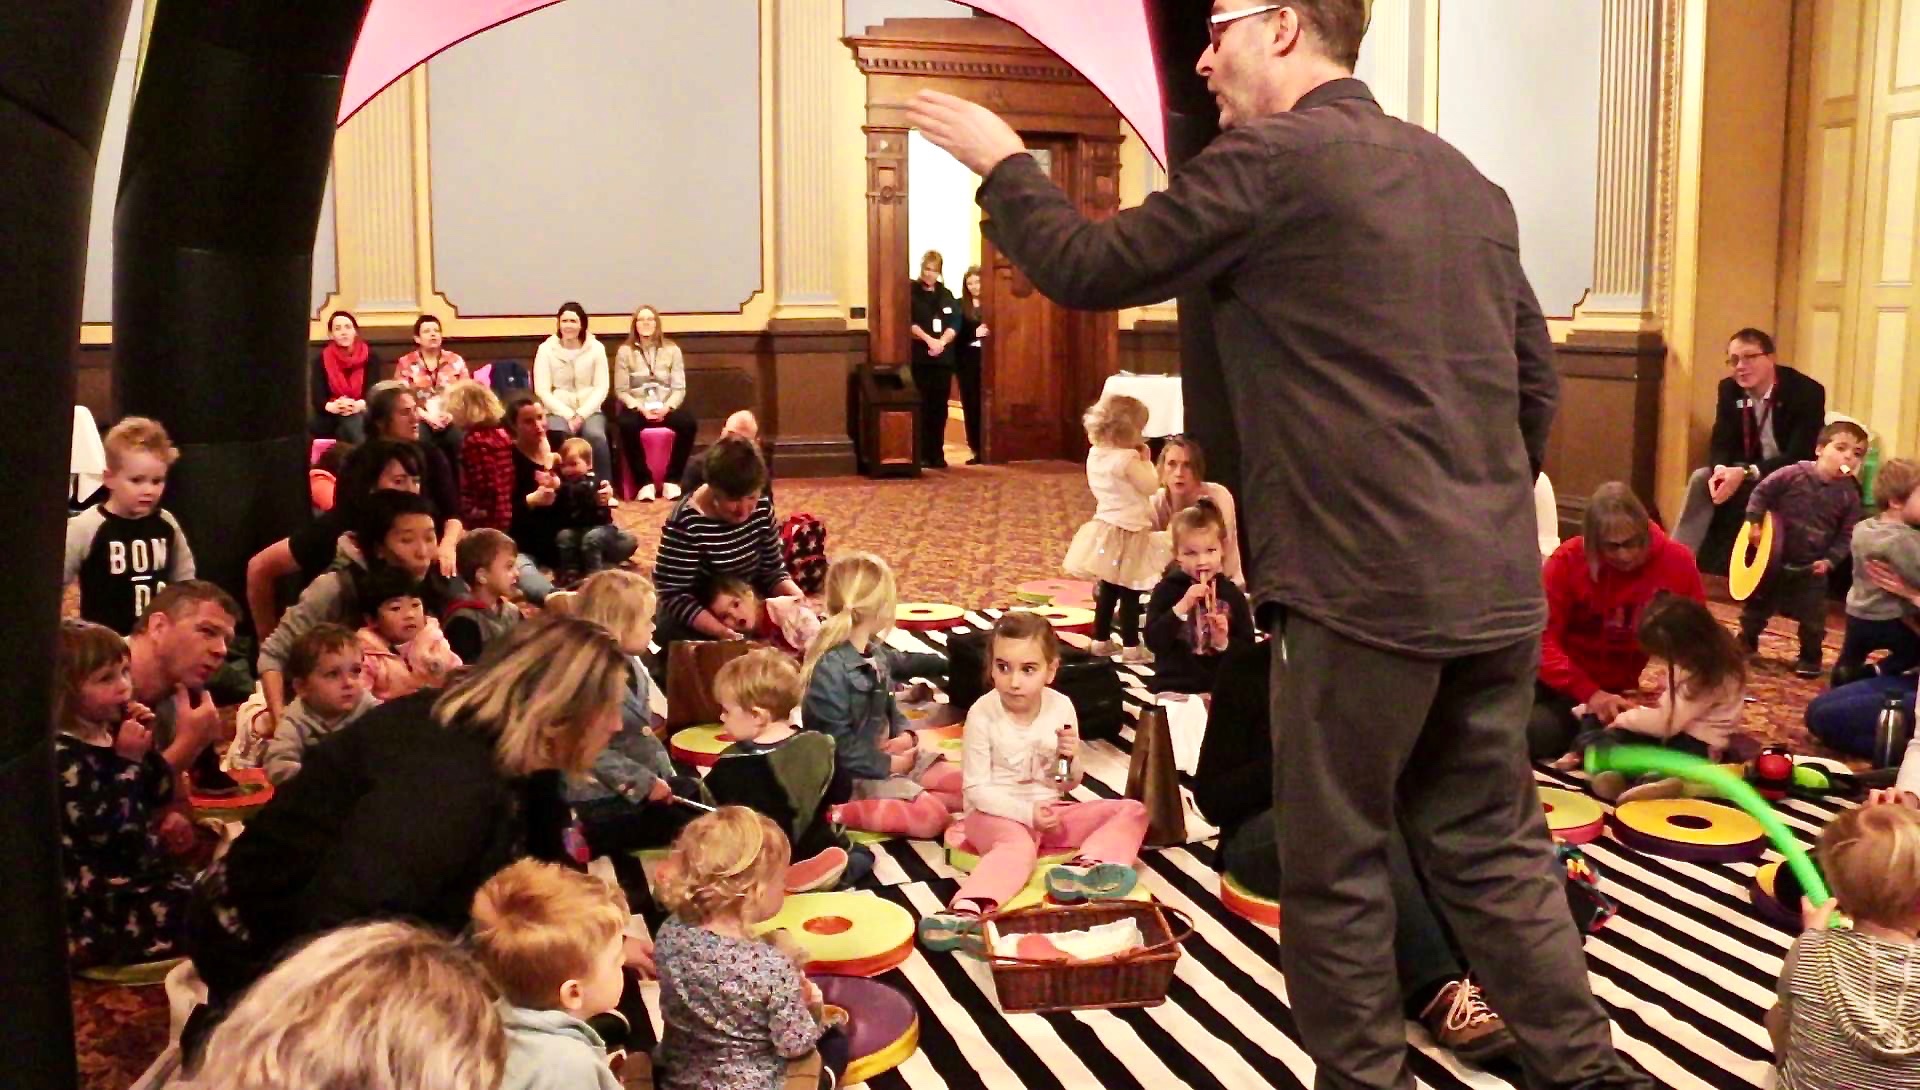 A man directing a grouped of seated toddlers with instruments